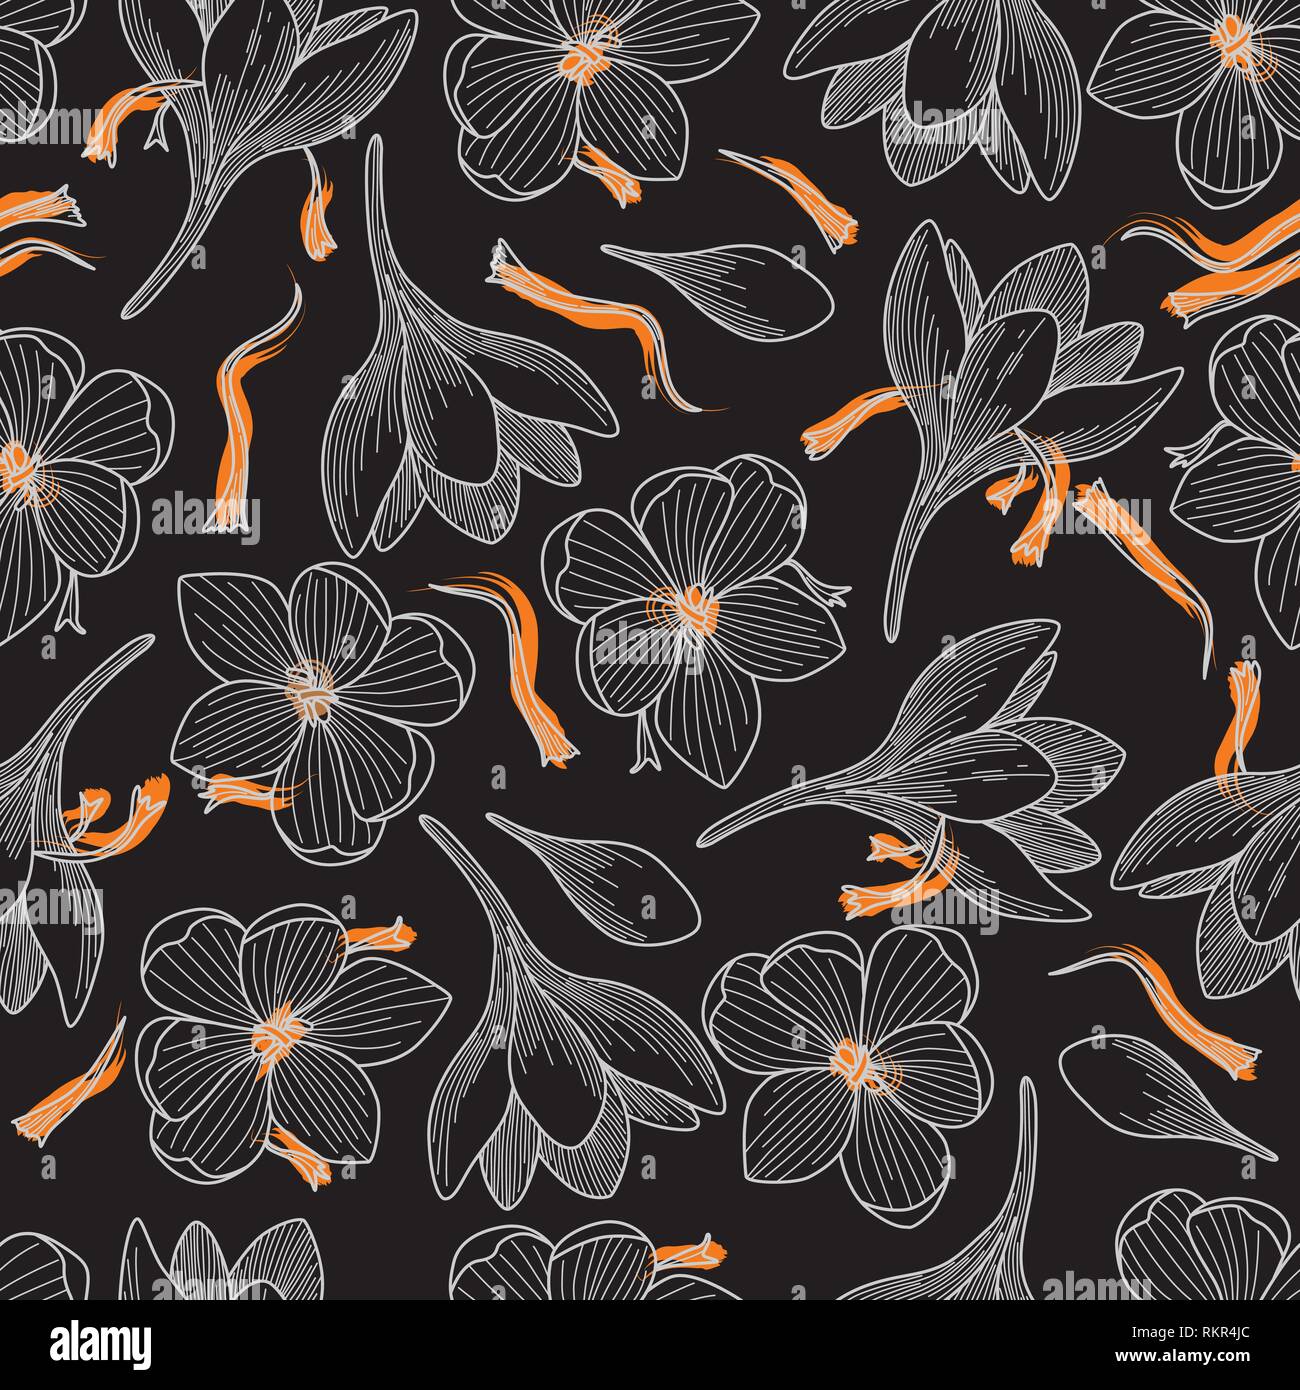 Detailed Orange Saffron and Crocus Flowers Line Drawing Seamless Pattern on Black Background Stock Vector